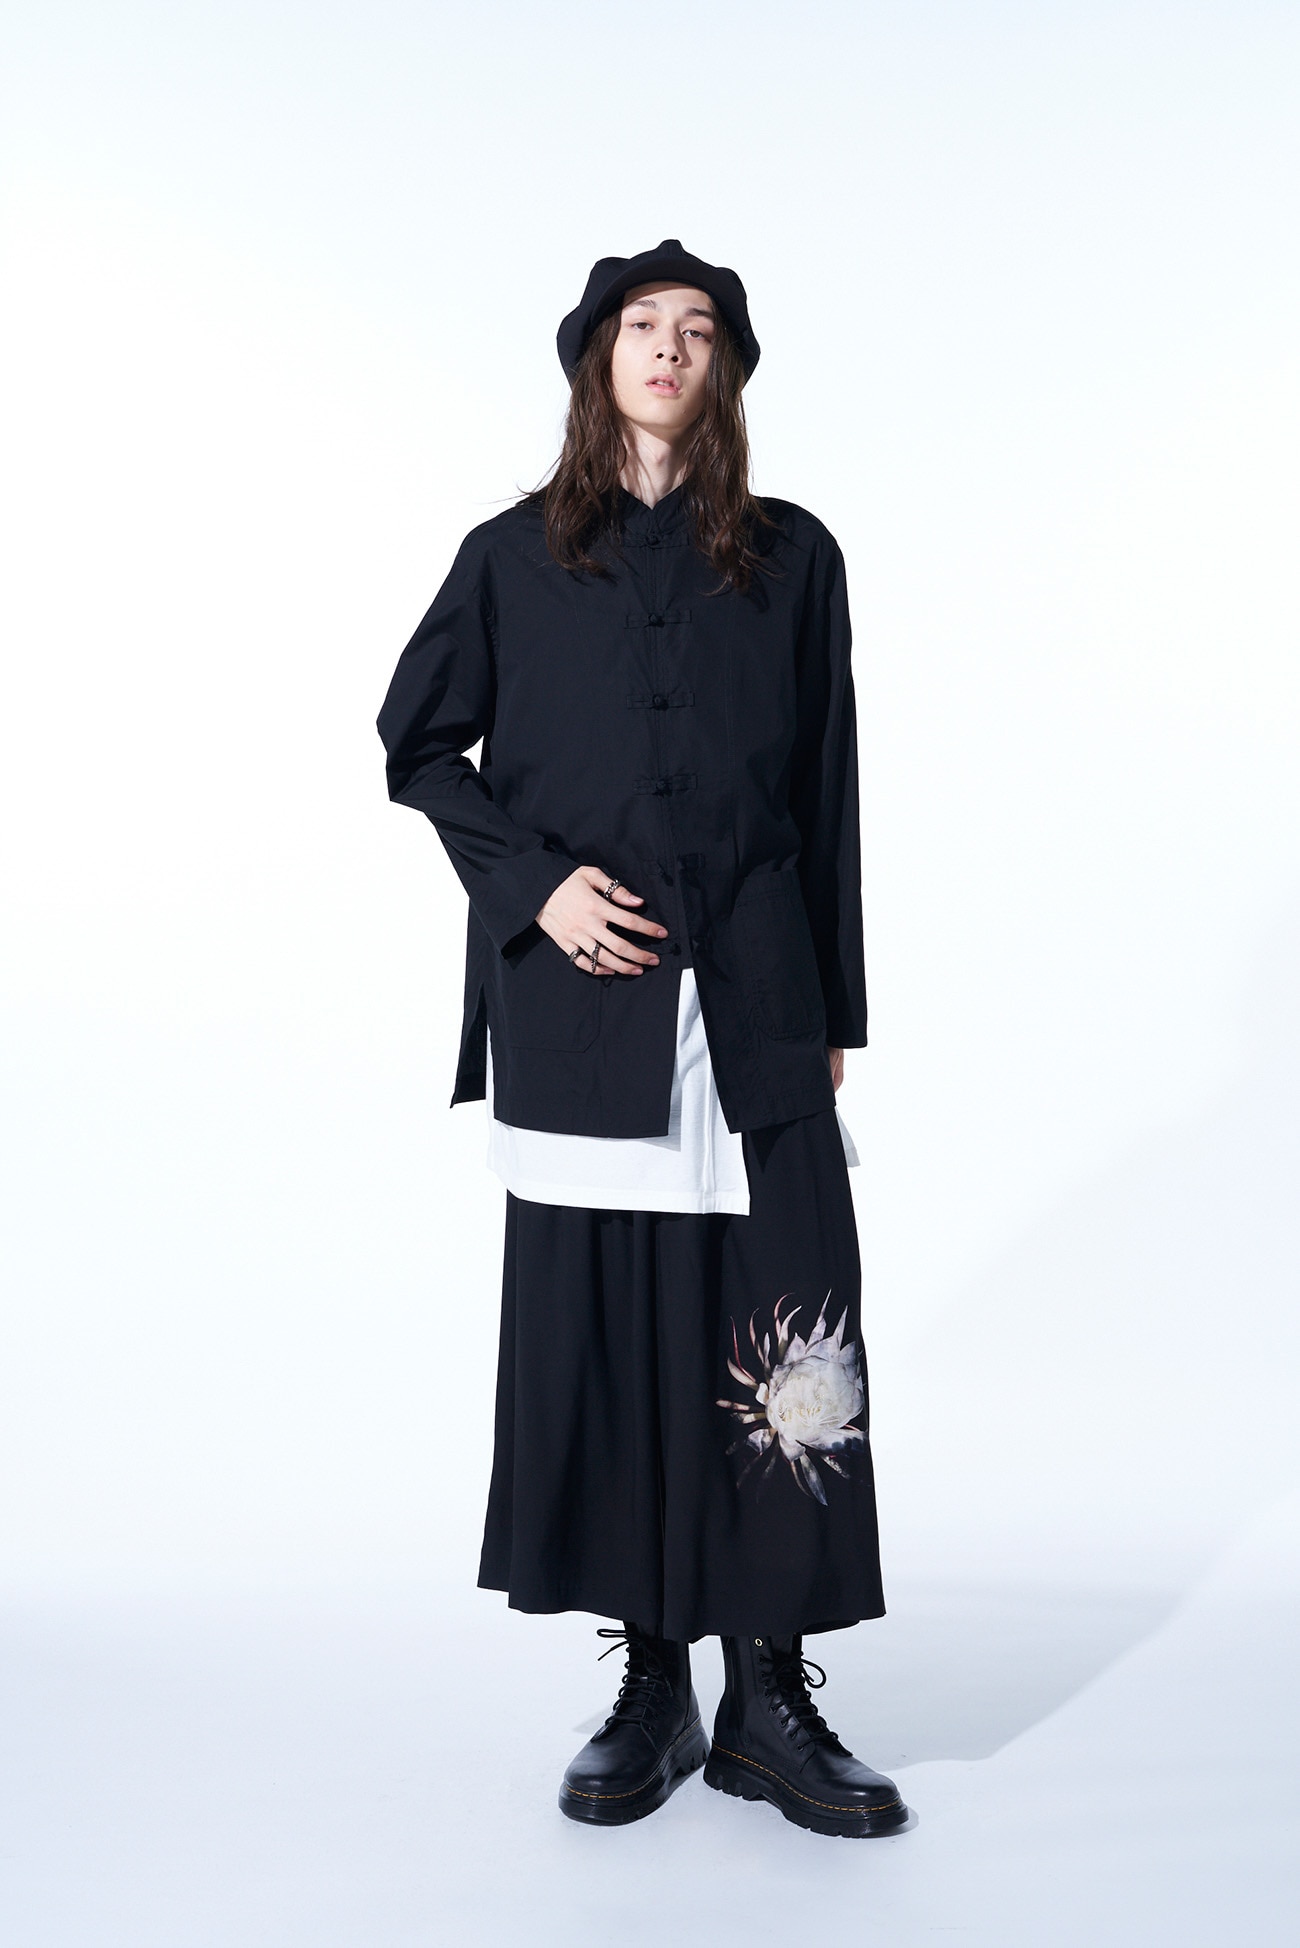 RAYON LOAN “QUEEN OF THE NIGHT“ PRINTED CULOTTE PANTS